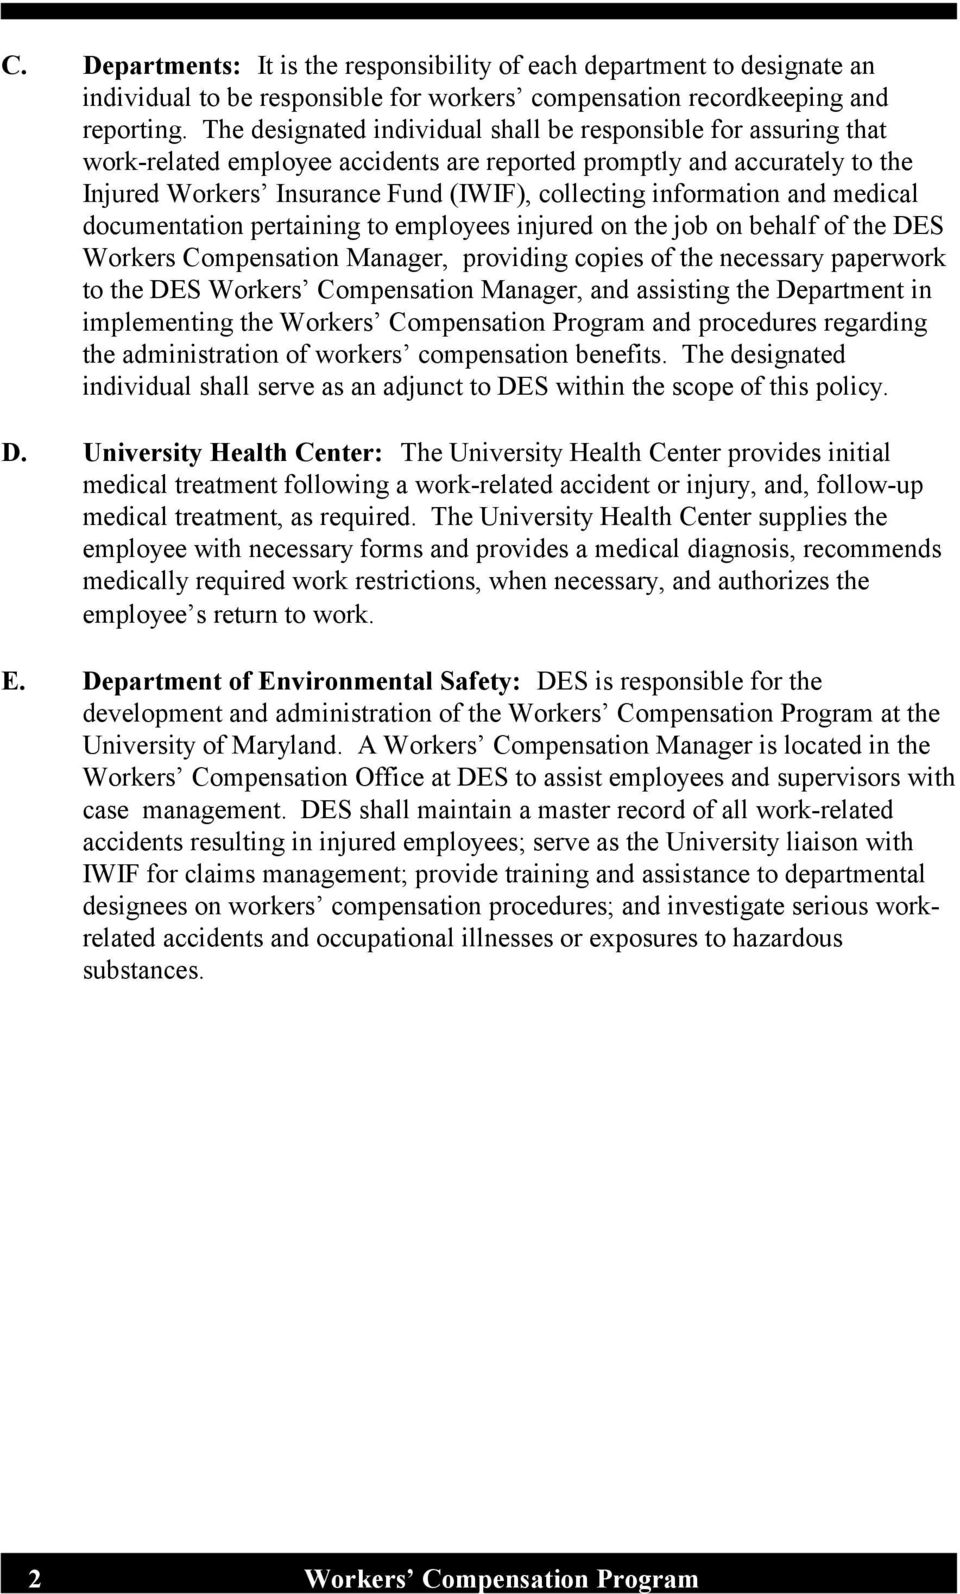 information and medical documentation pertaining to employees injured on the job on behalf of the DES Workers Compensation Manager, providing copies of the necessary paperwork to the DES Workers